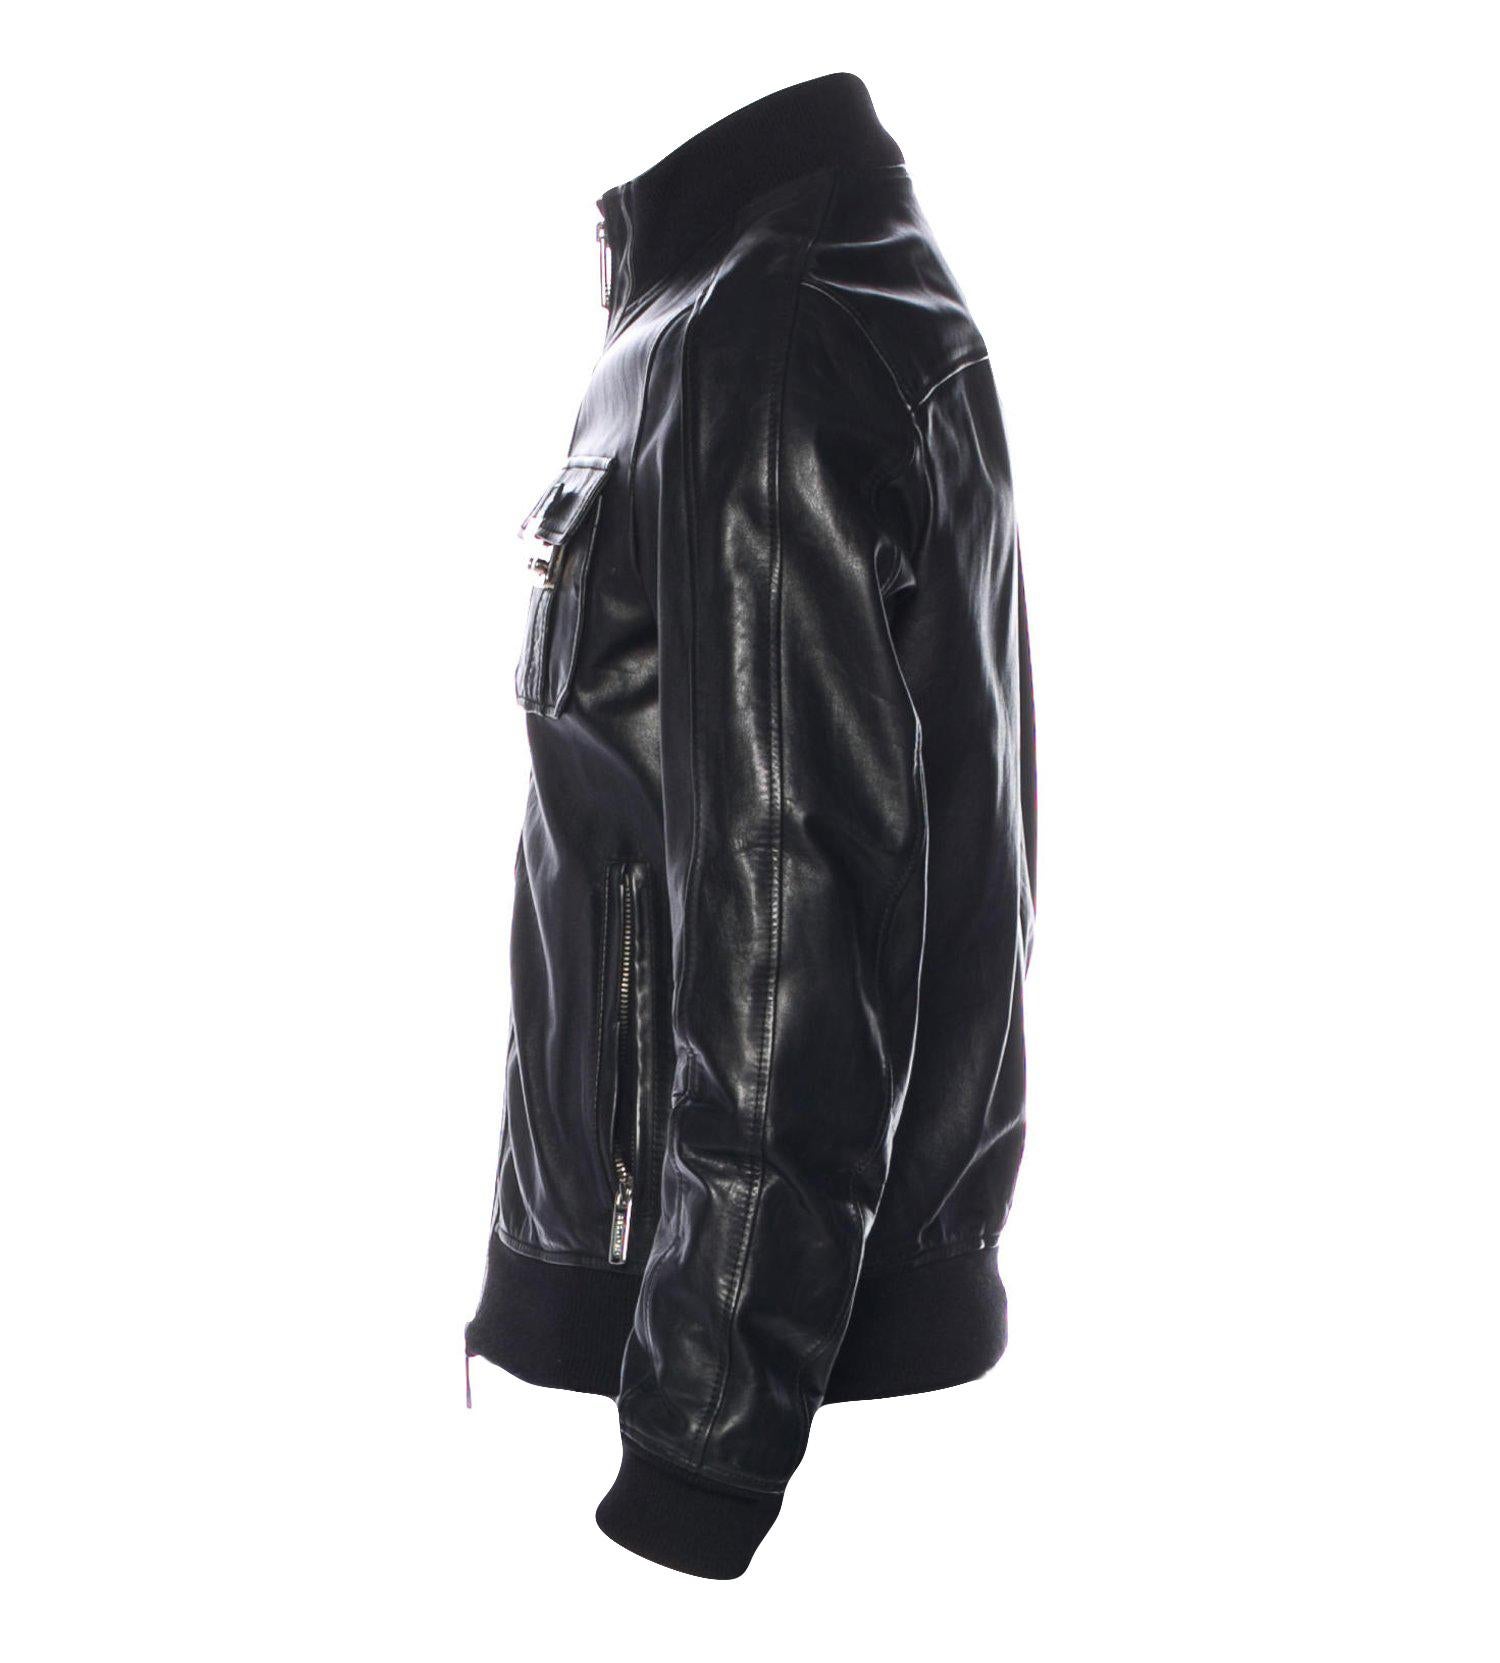 Men's black Dsquared² leather bomber jacket with mock neck, four pockets, woven check lining, single interior pocket and zip closure at front. Includes tag. 

Size: IT48
Chest: 42 inches
Shoulder: 17.5 inches
Length: 26 inches
Sleeve: 33 inches